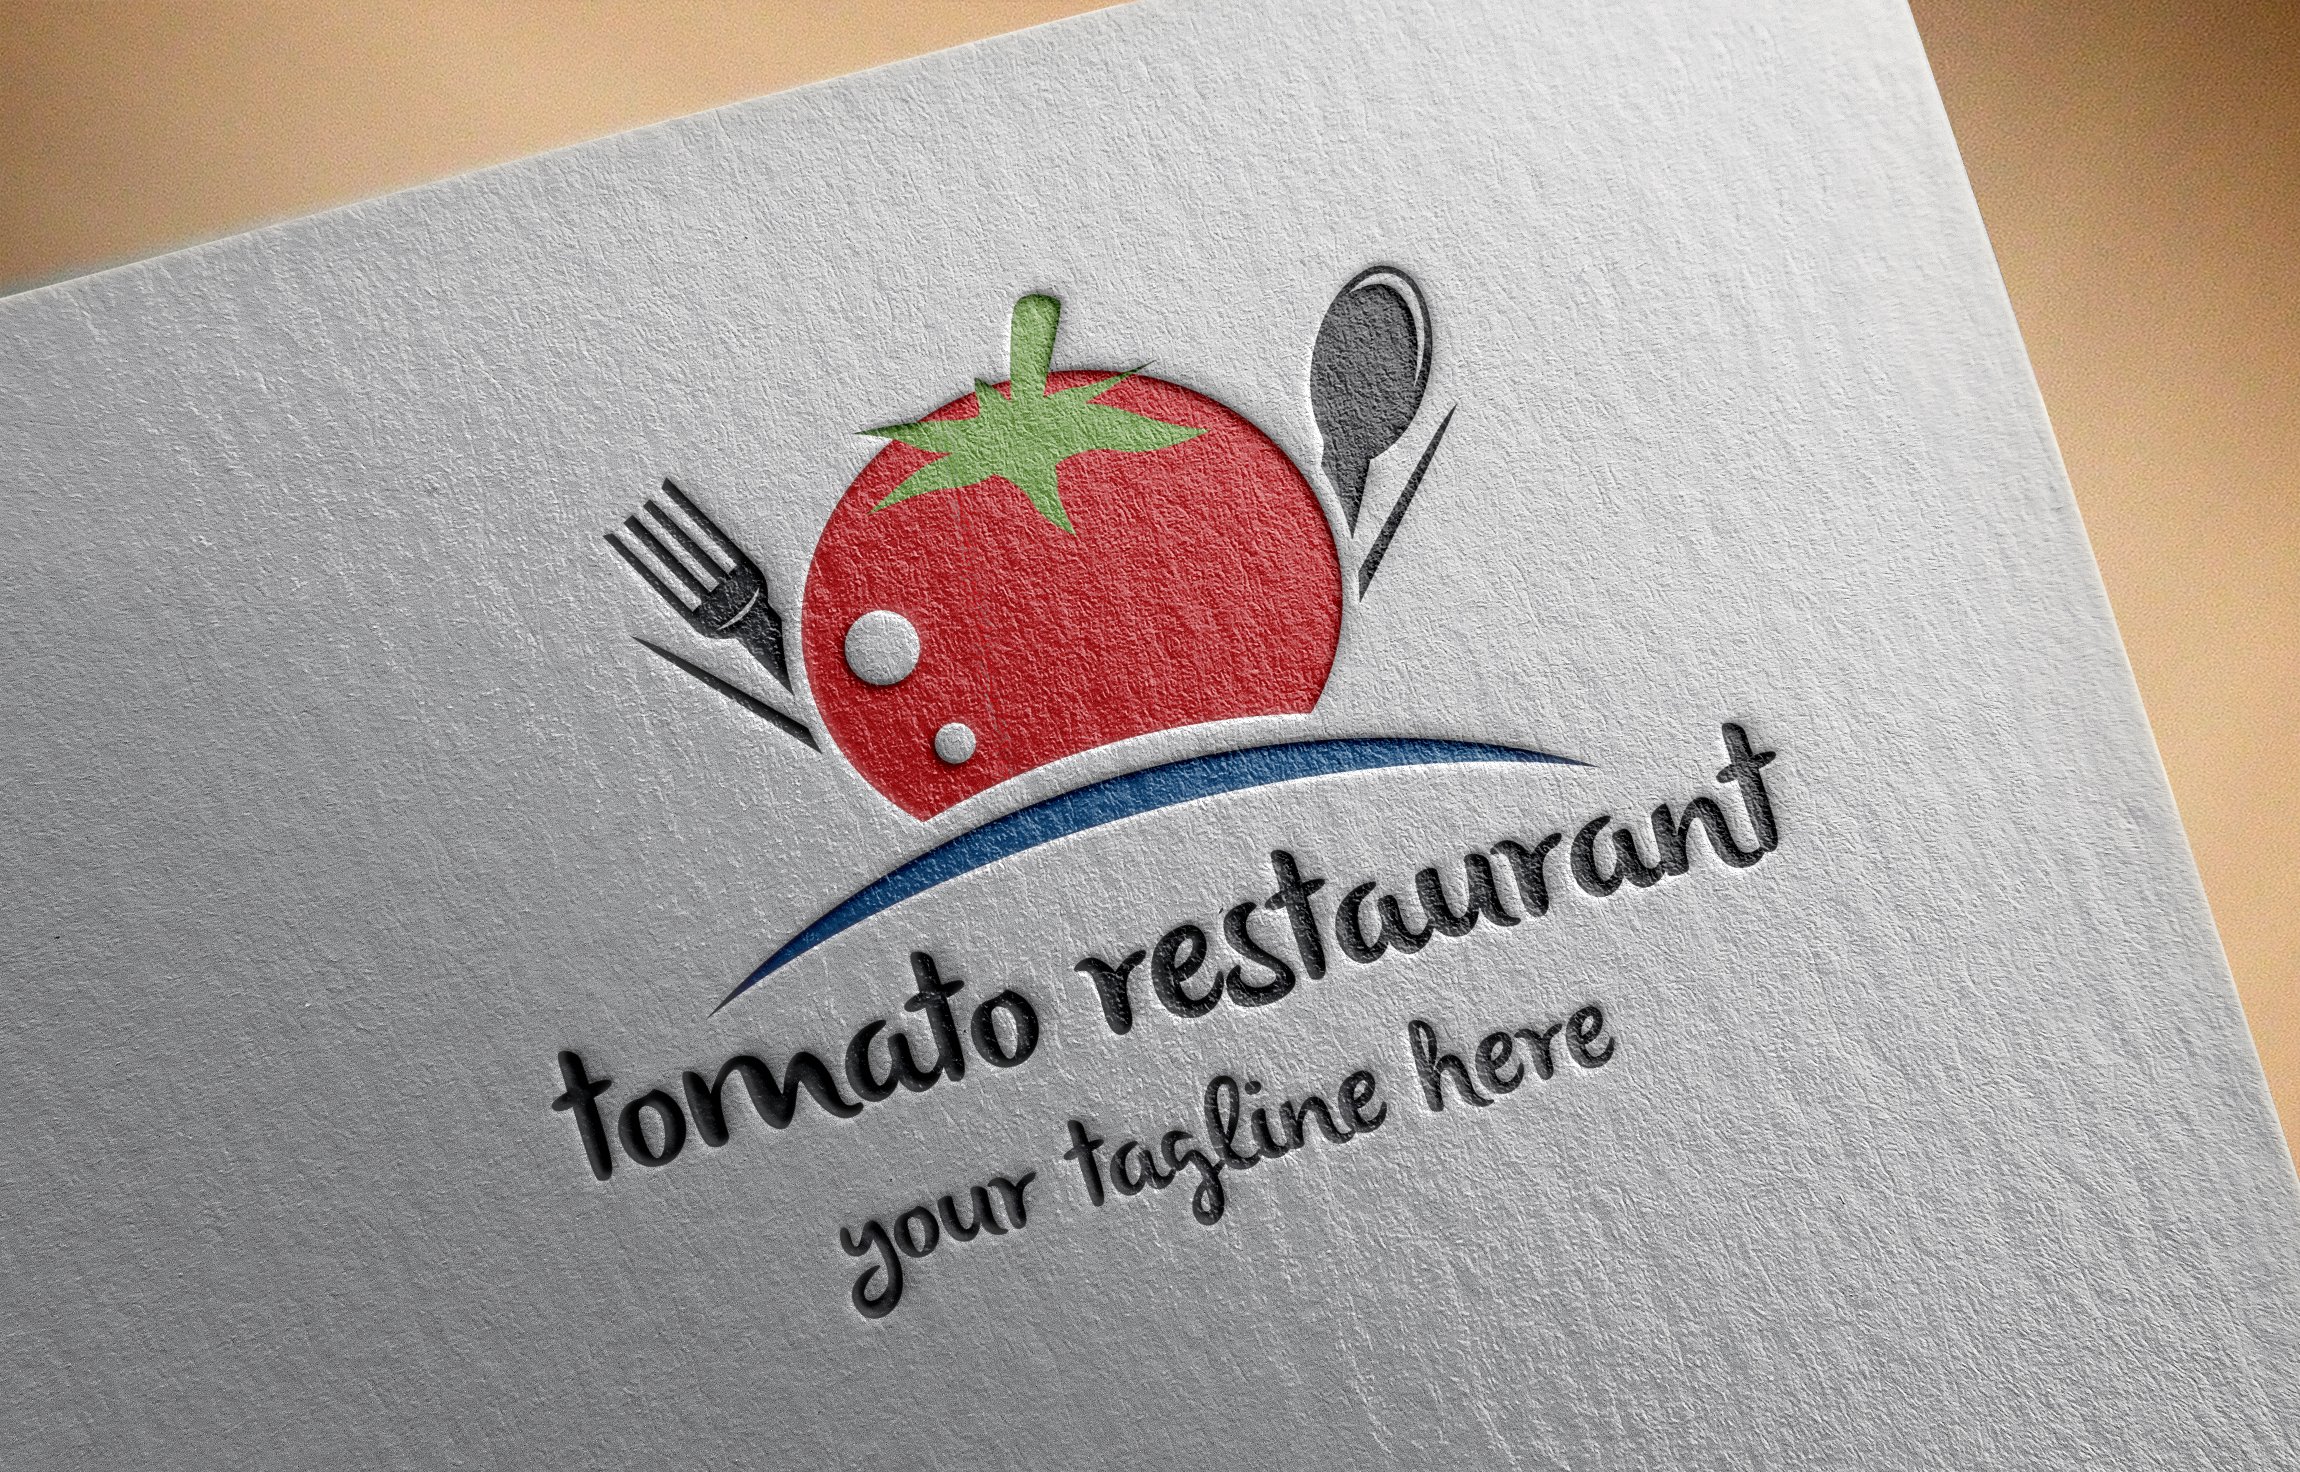 White mat paper with a colorful tomato logo.